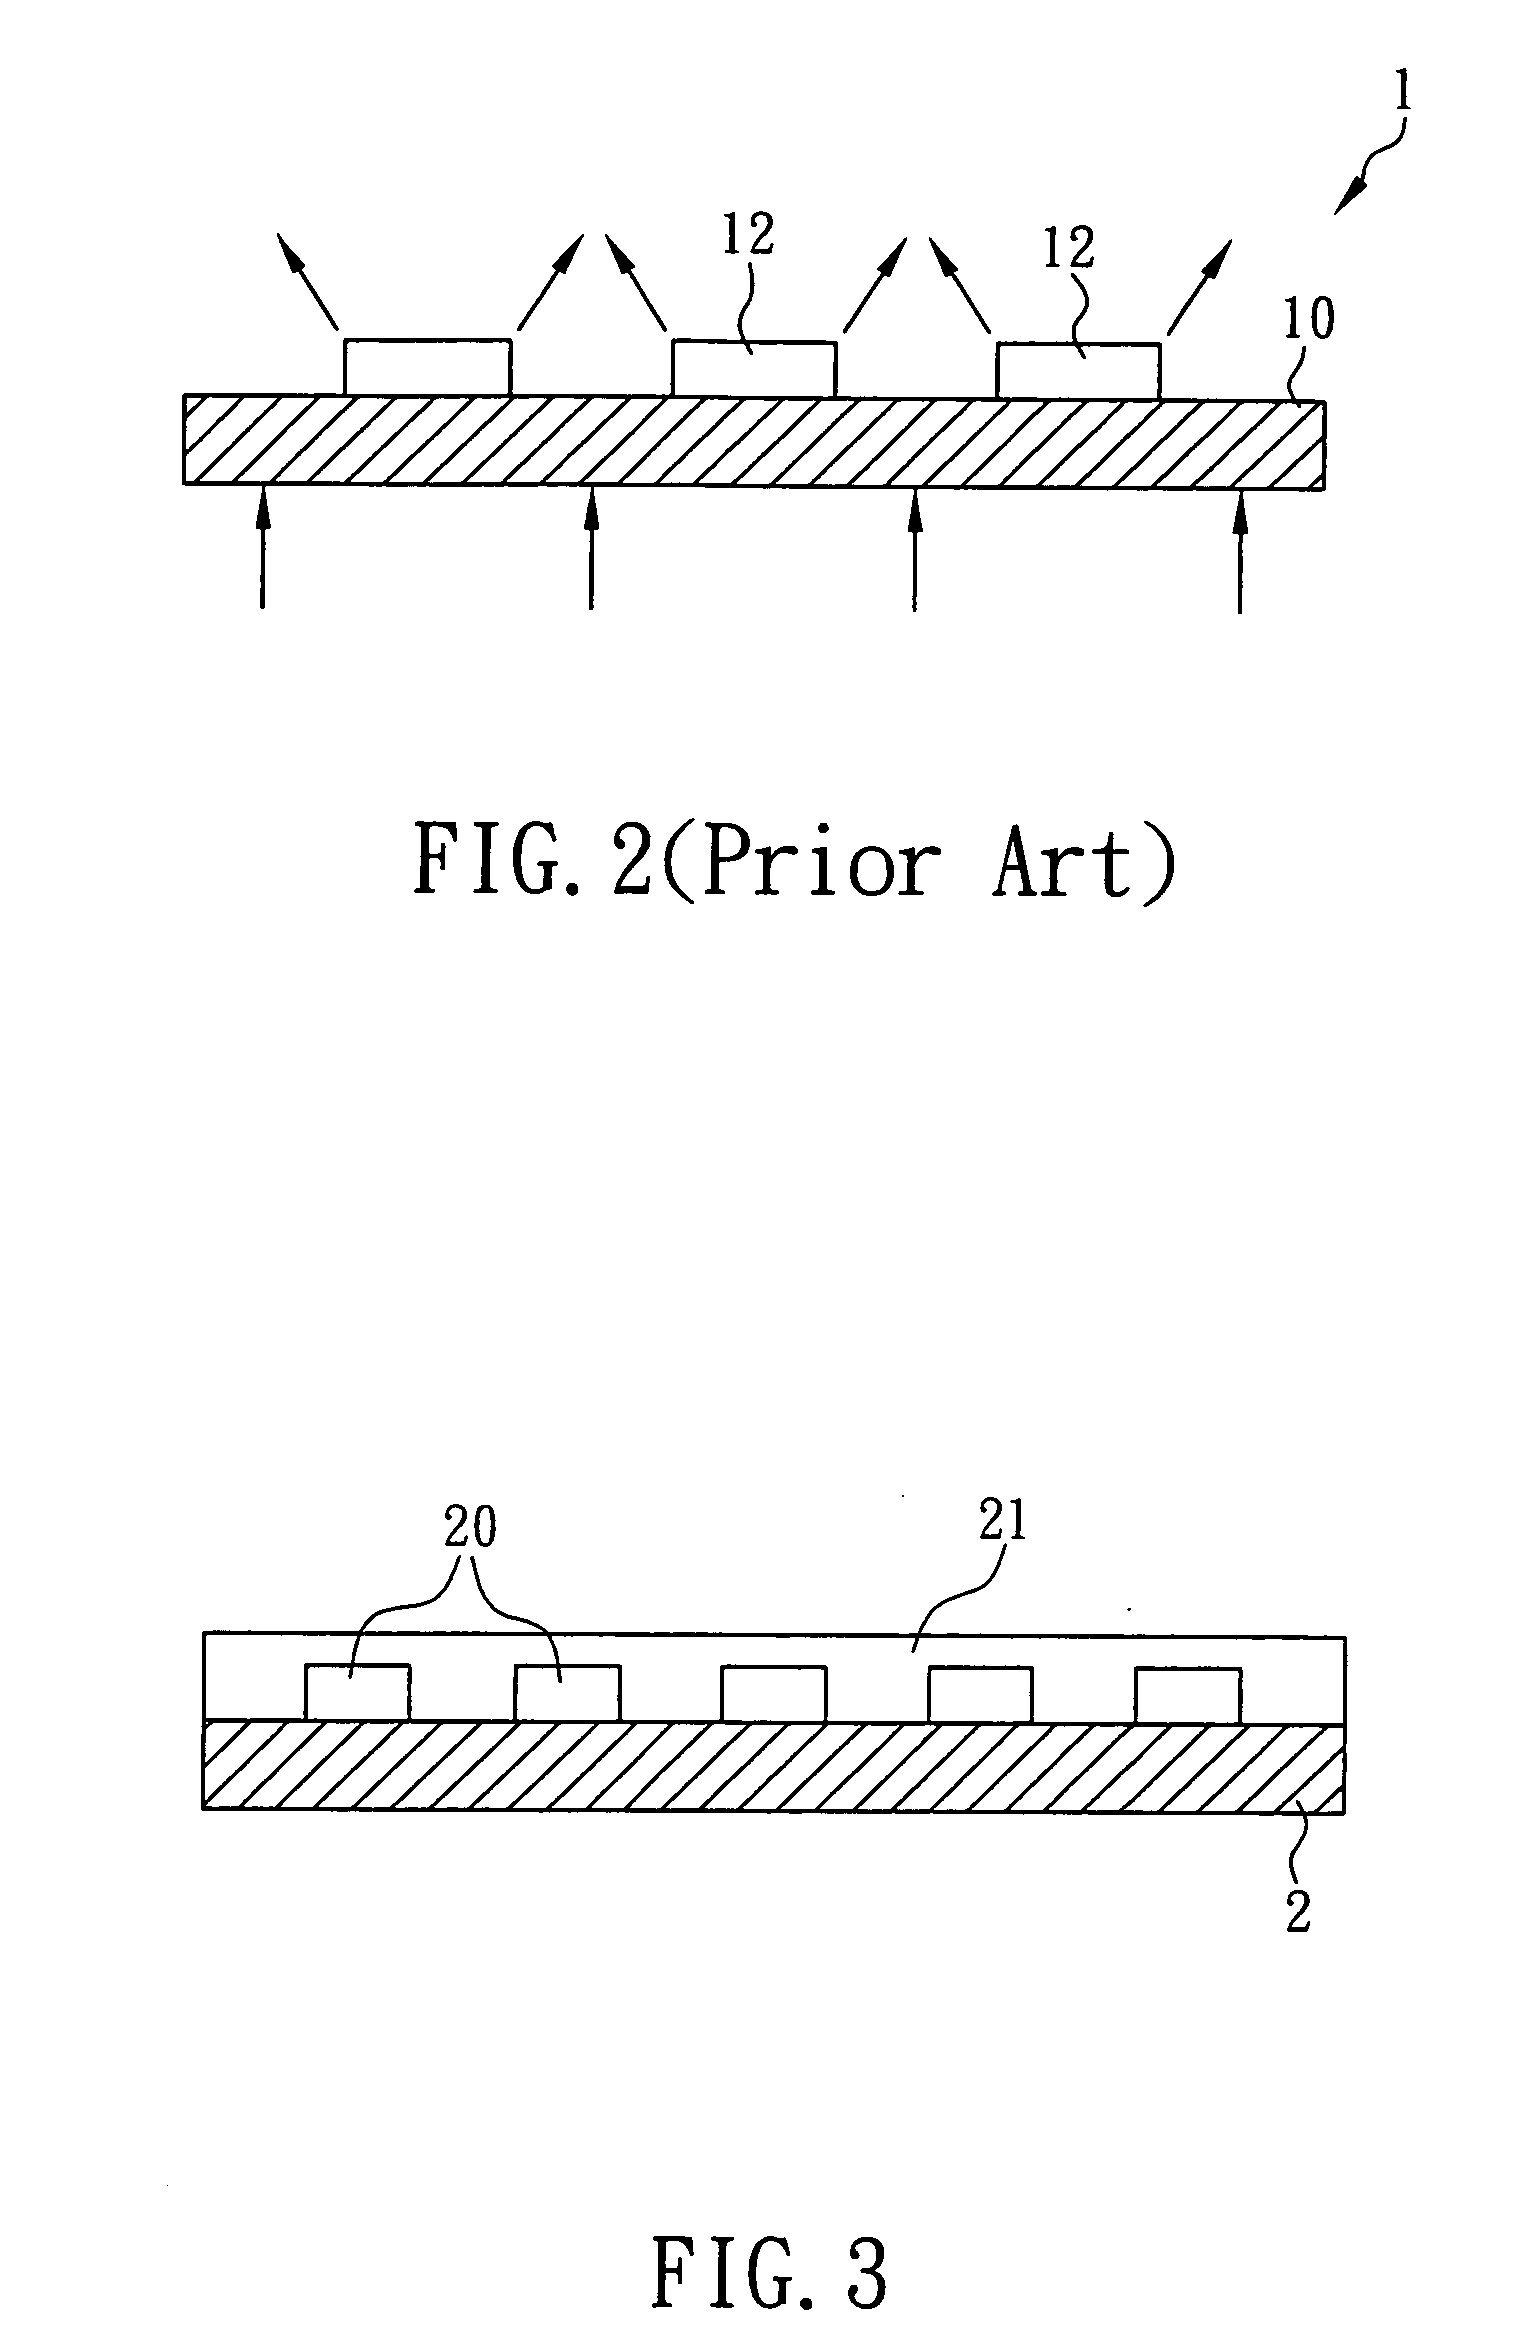 Method of hiding transparent electrodes on a transparent substrate